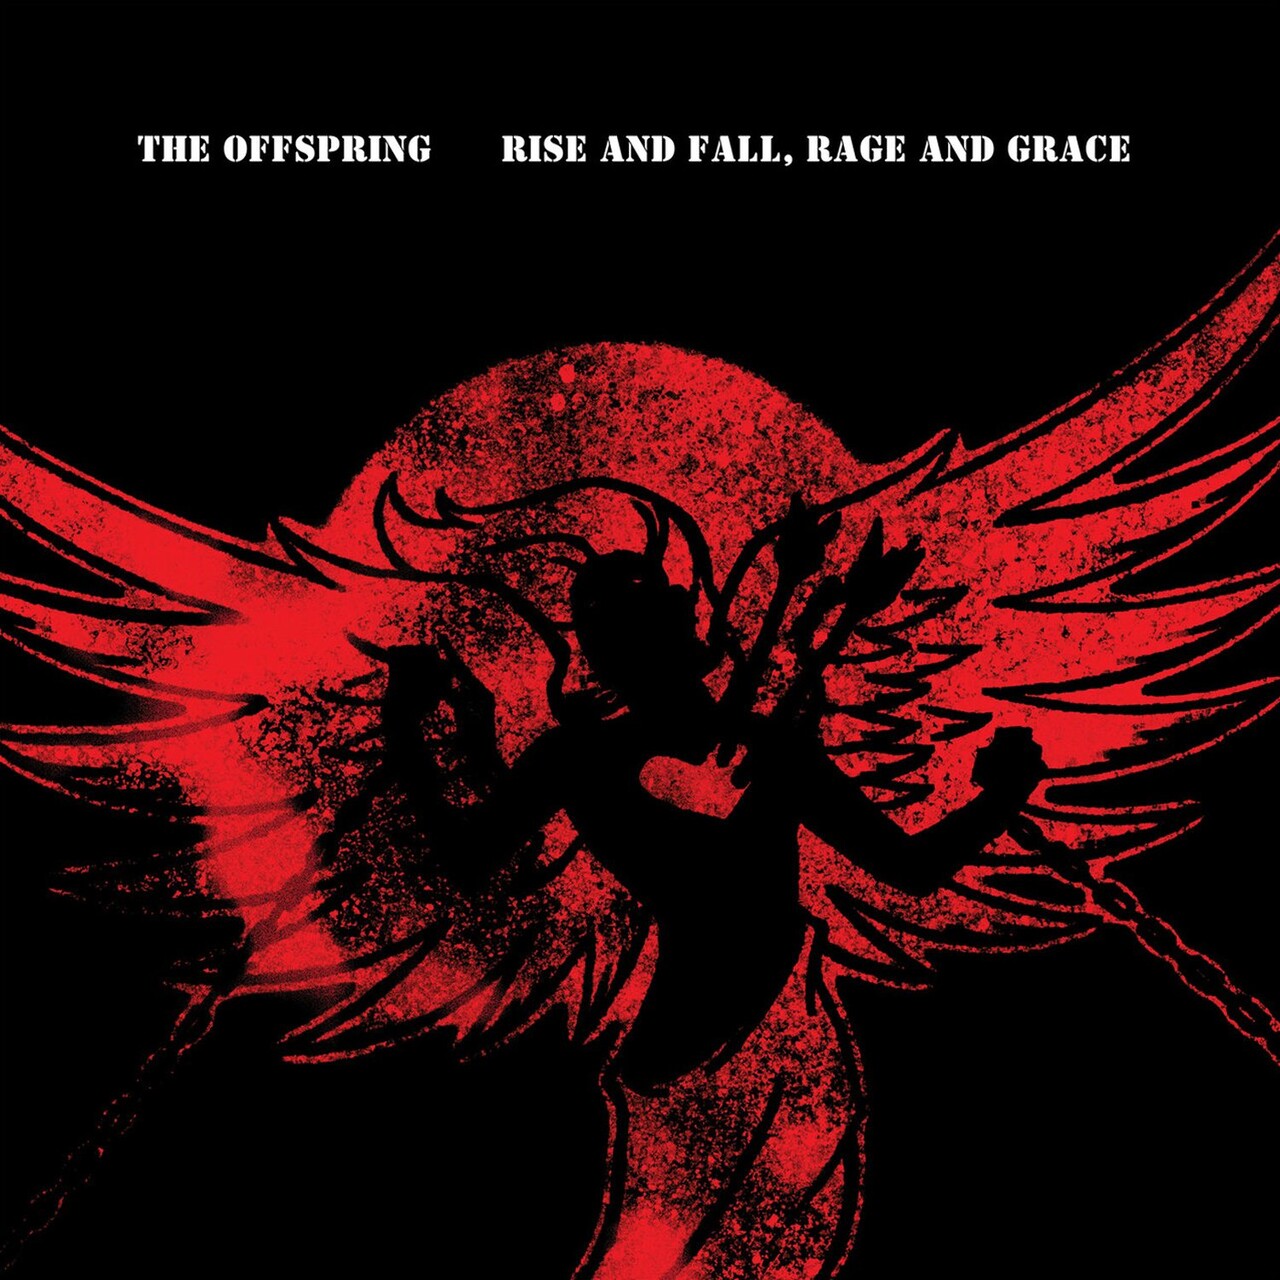 Рок Universal (Aus) Offspring, The - Rise And Fall, Rage And Grace (Black Vinyl LP)